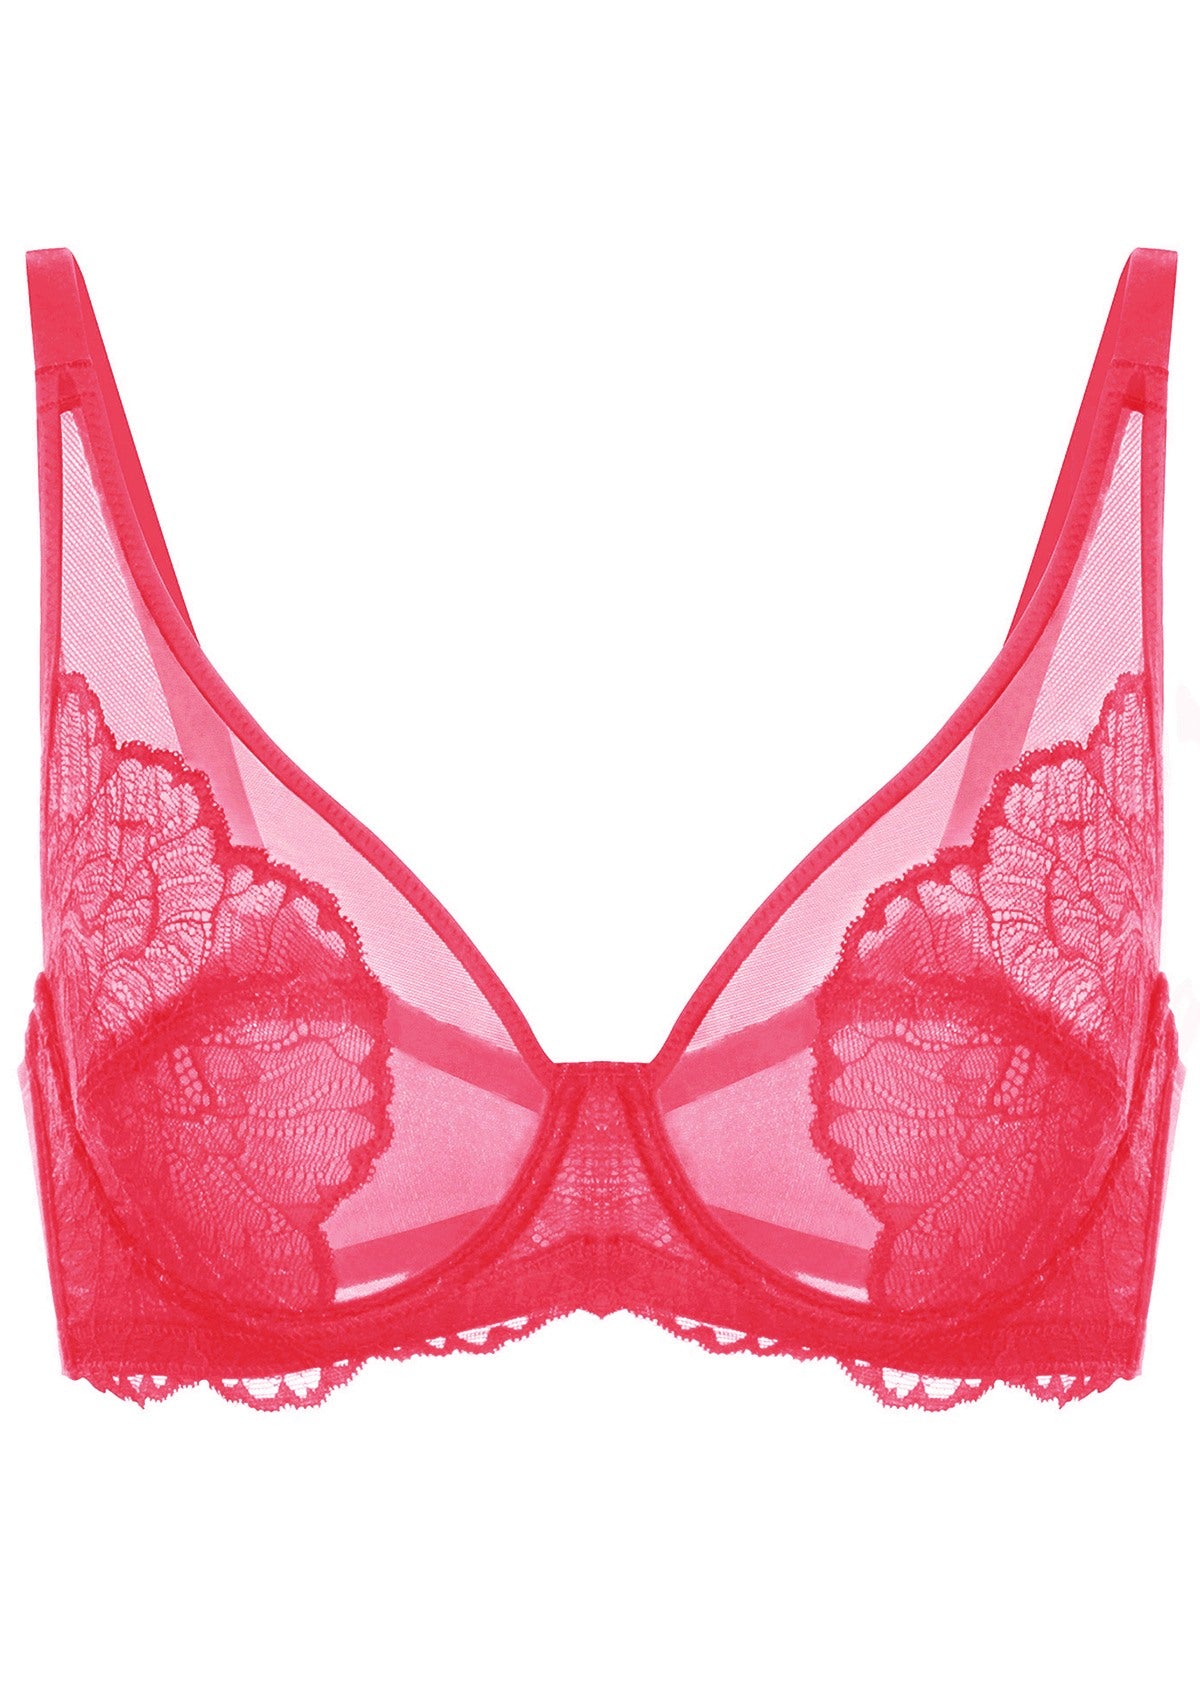 HSIA Blossom Unlined Lace Underwire Bra - Burgundy / 34 / C